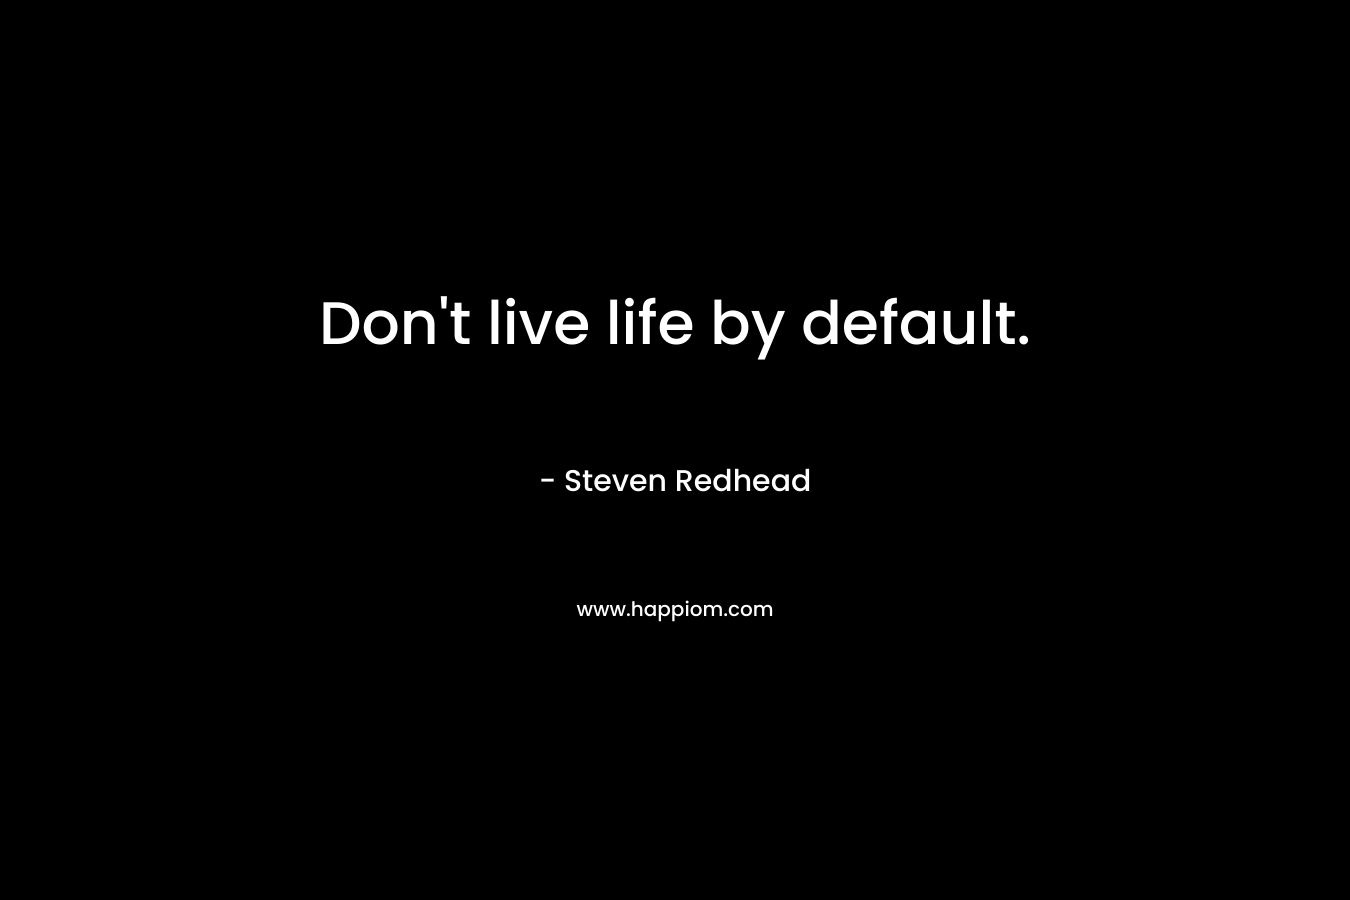 Don't live life by default.